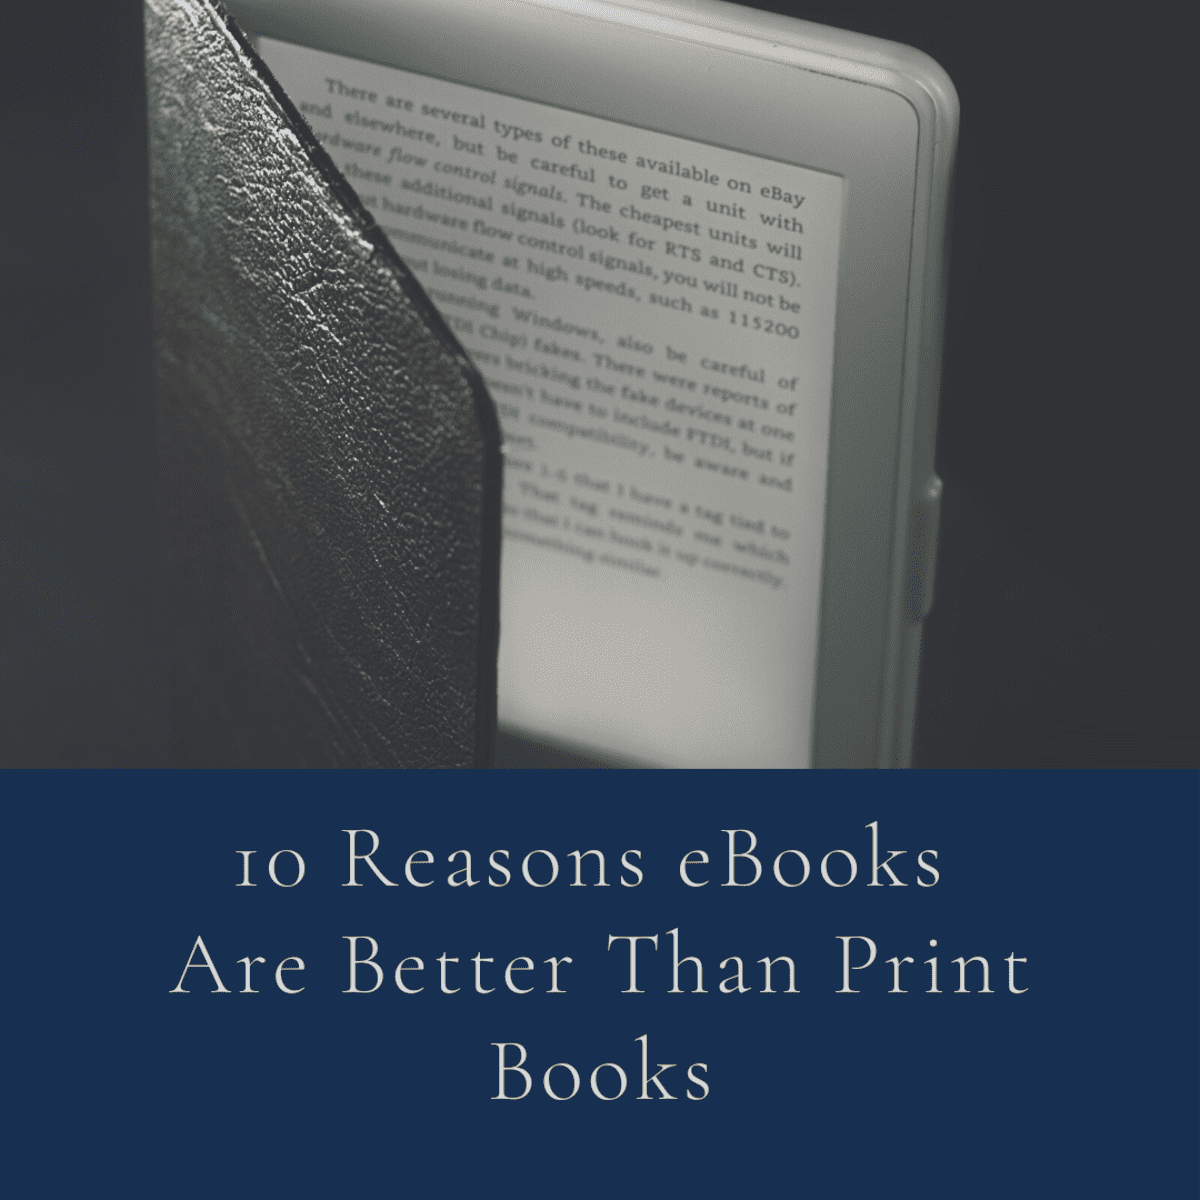 Why ebook is cheaper than paperback?